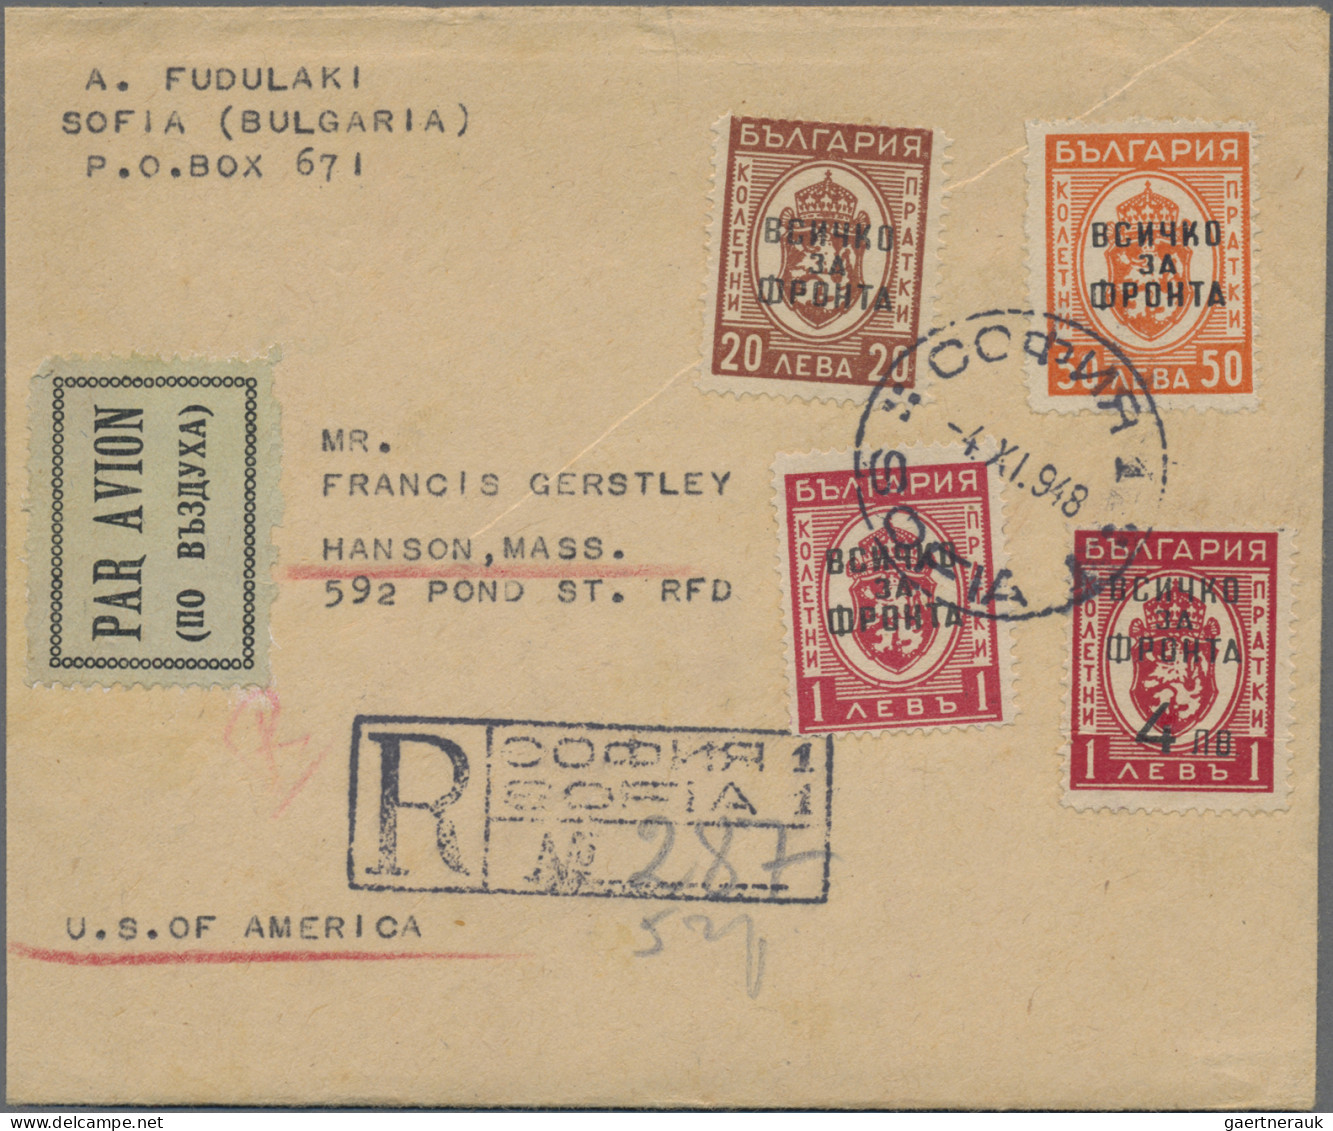 Bulgaria: 1900/1960 (ca.), assortment of apprx. 116 covers/cards, all apparently